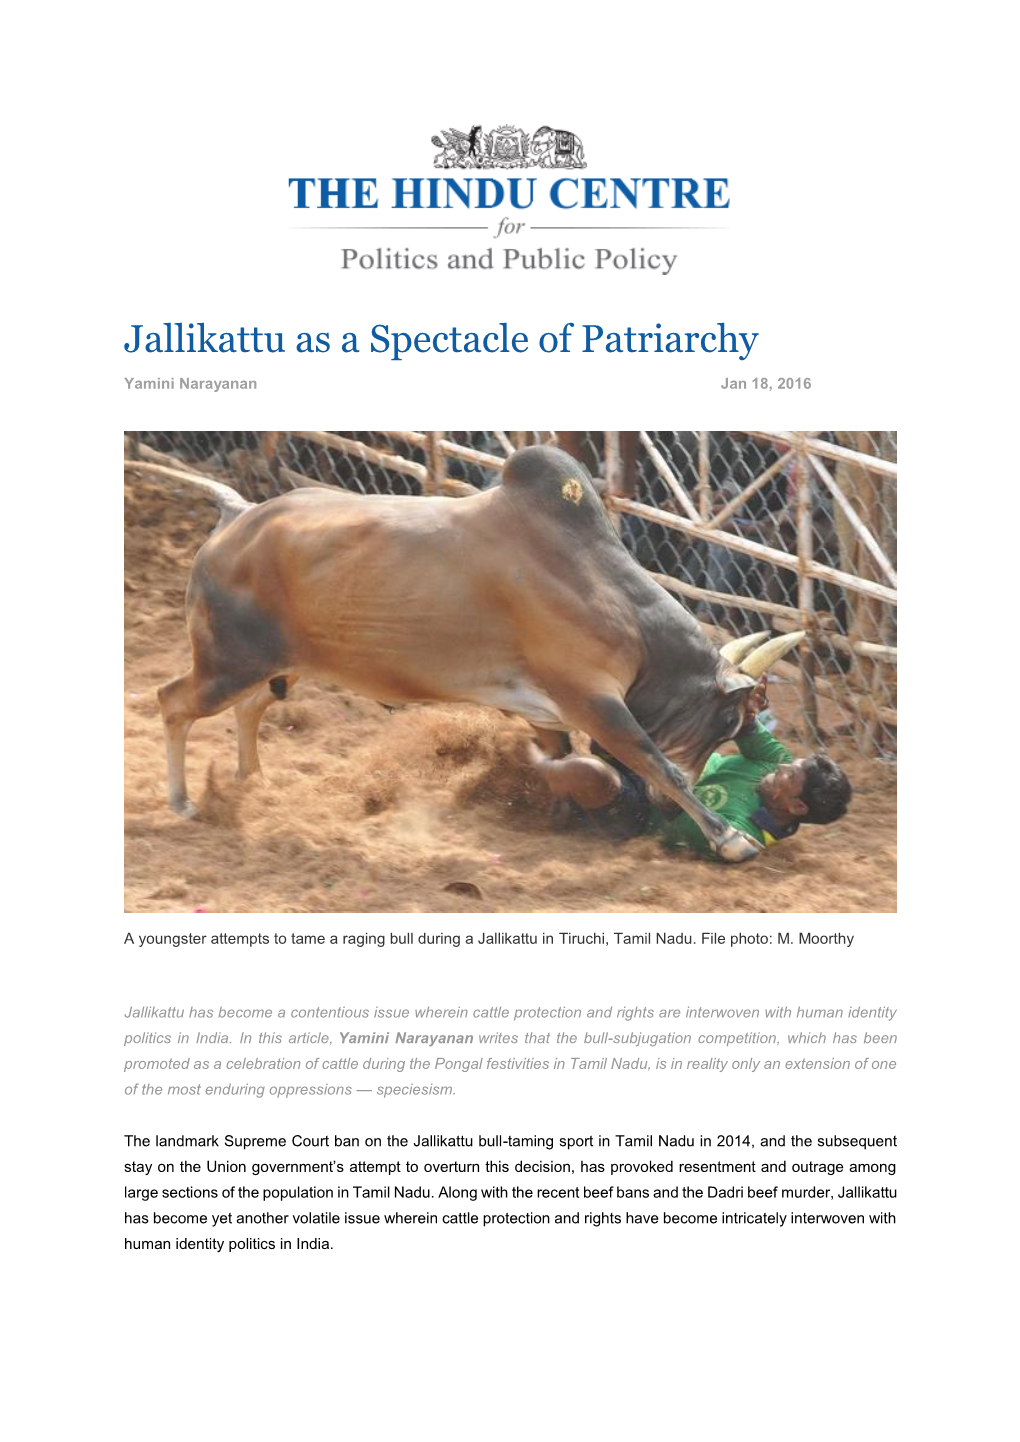 Jallikattu As a Spectacle of Patriarchy